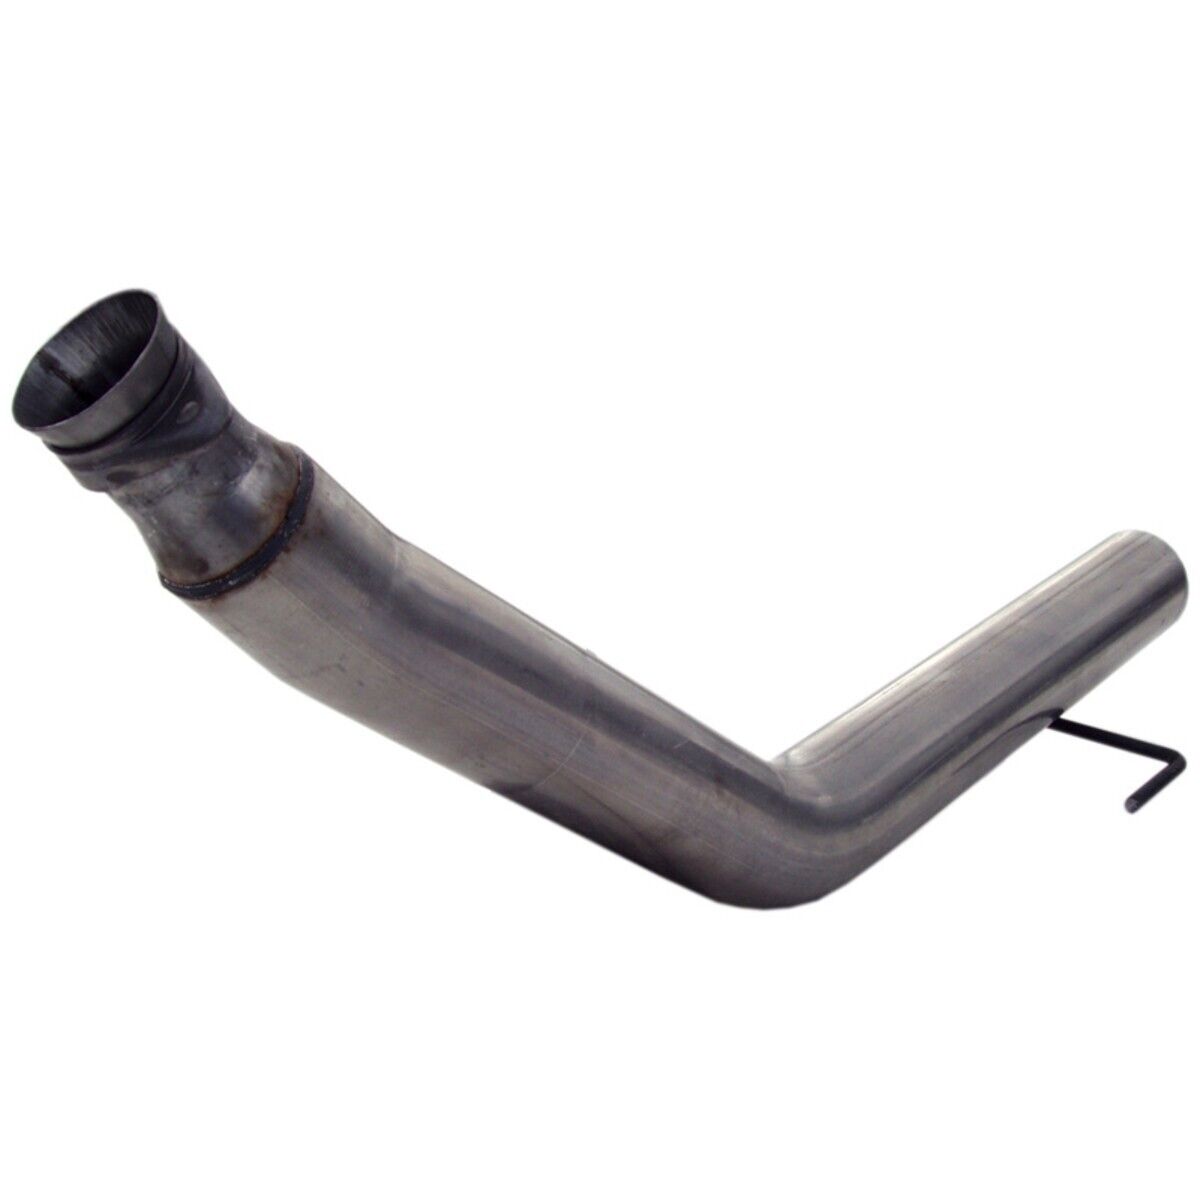 DAL401 MBRP Down Pipe for Ram Truck Dodge 2500 3500 1994-2002